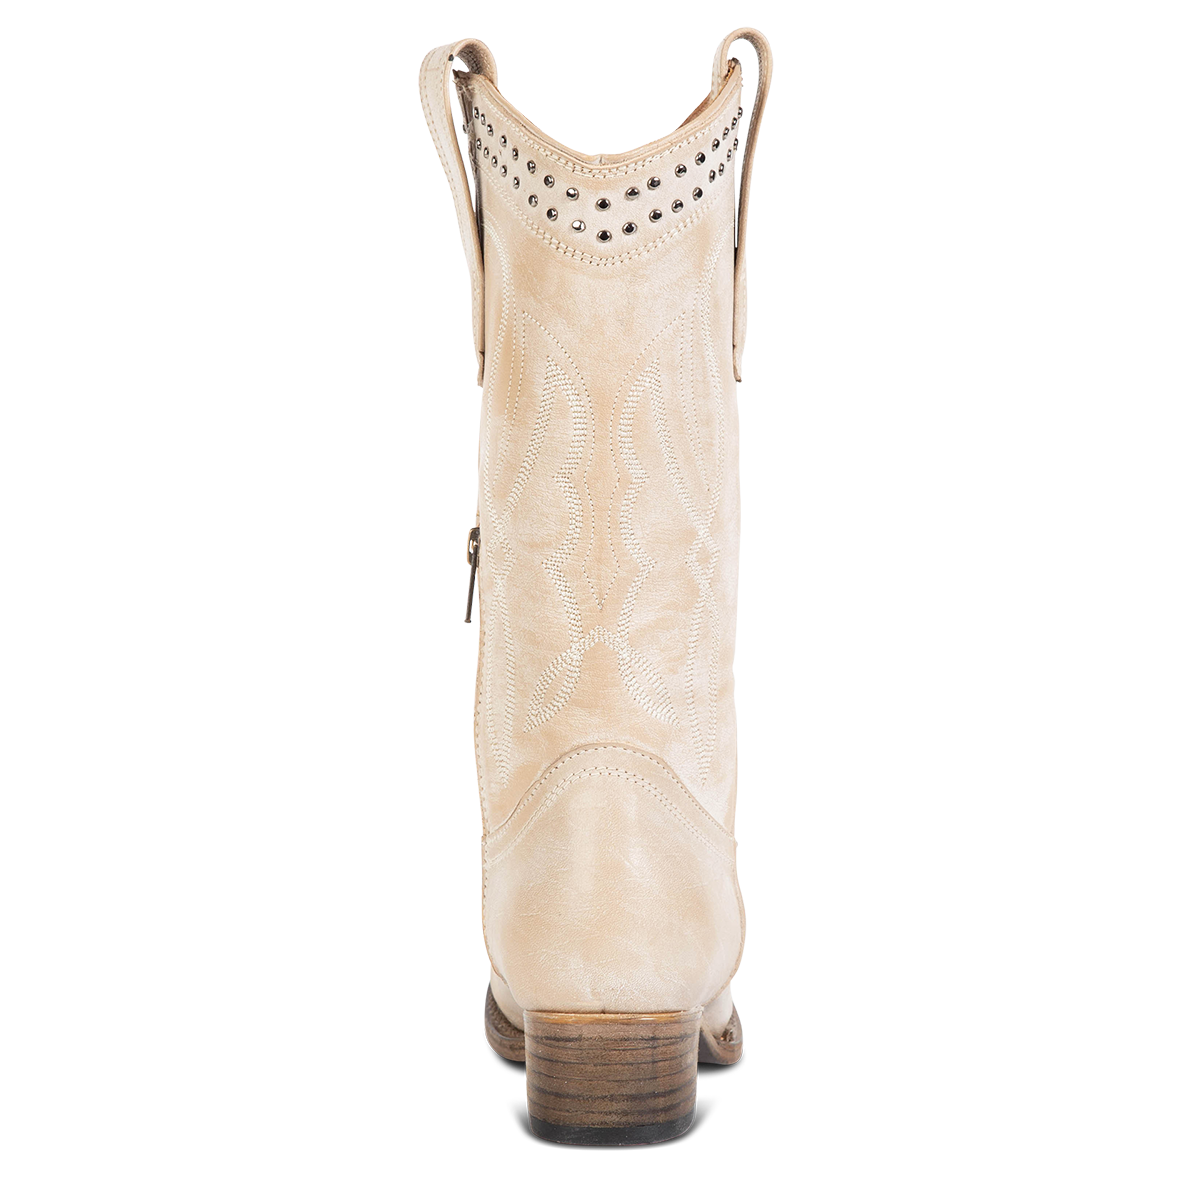 Back view showing slim-fit calf shaft construction and low-heel with stud and stitch detailing on FREEBIRD women's Zion beige western mid boot